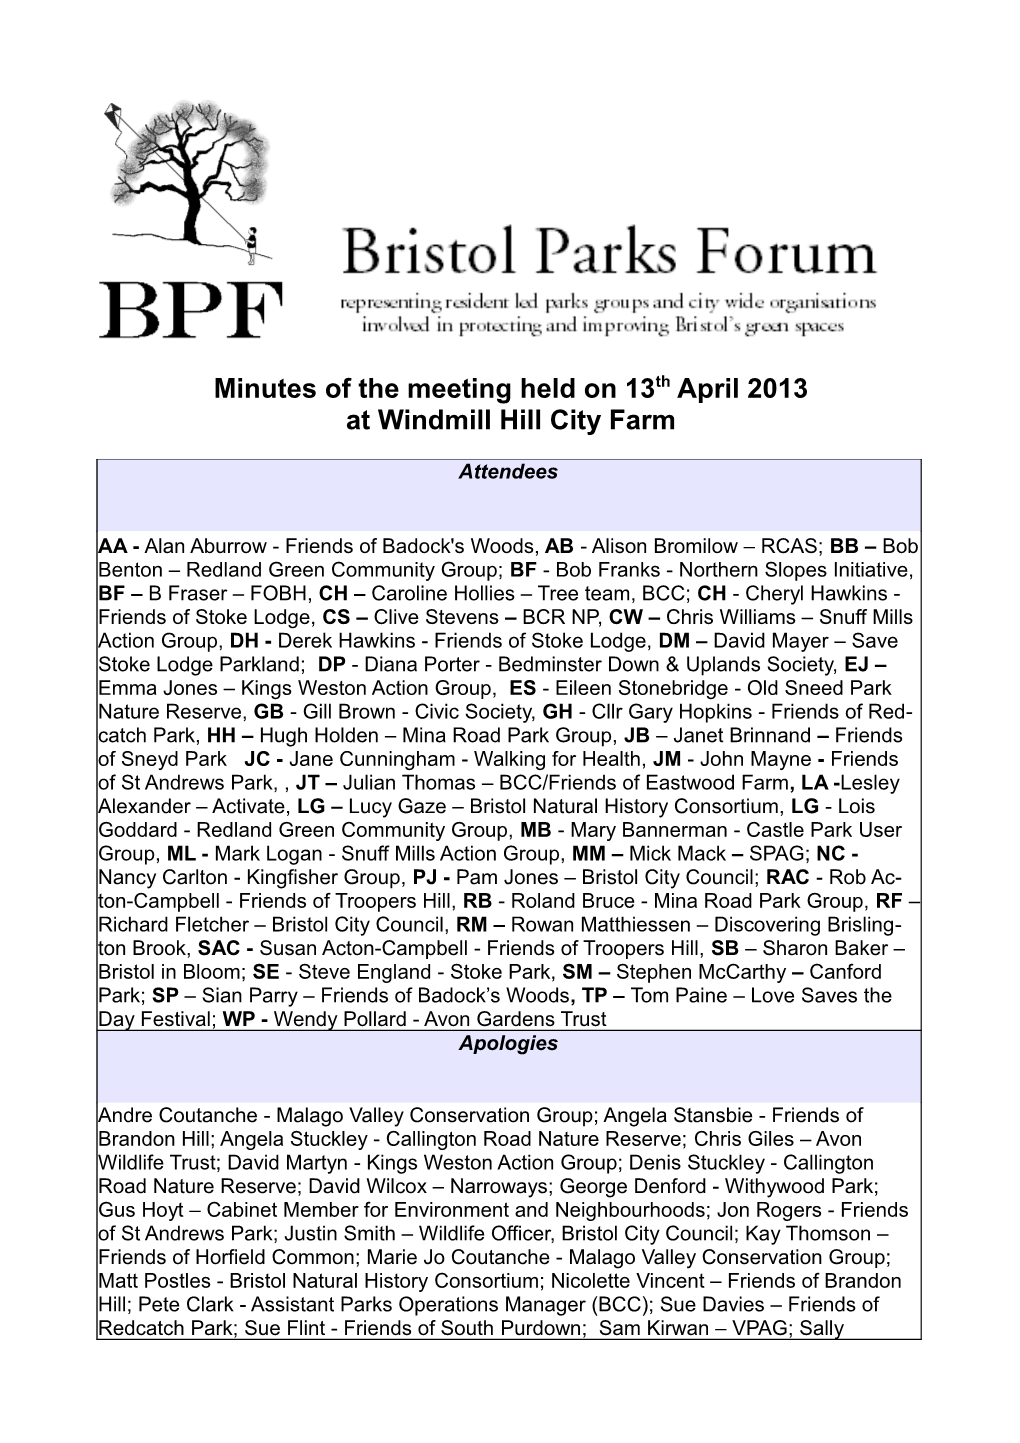 Minutes of the Meeting Held on 13Th April 2013 at Windmill Hill City Farm